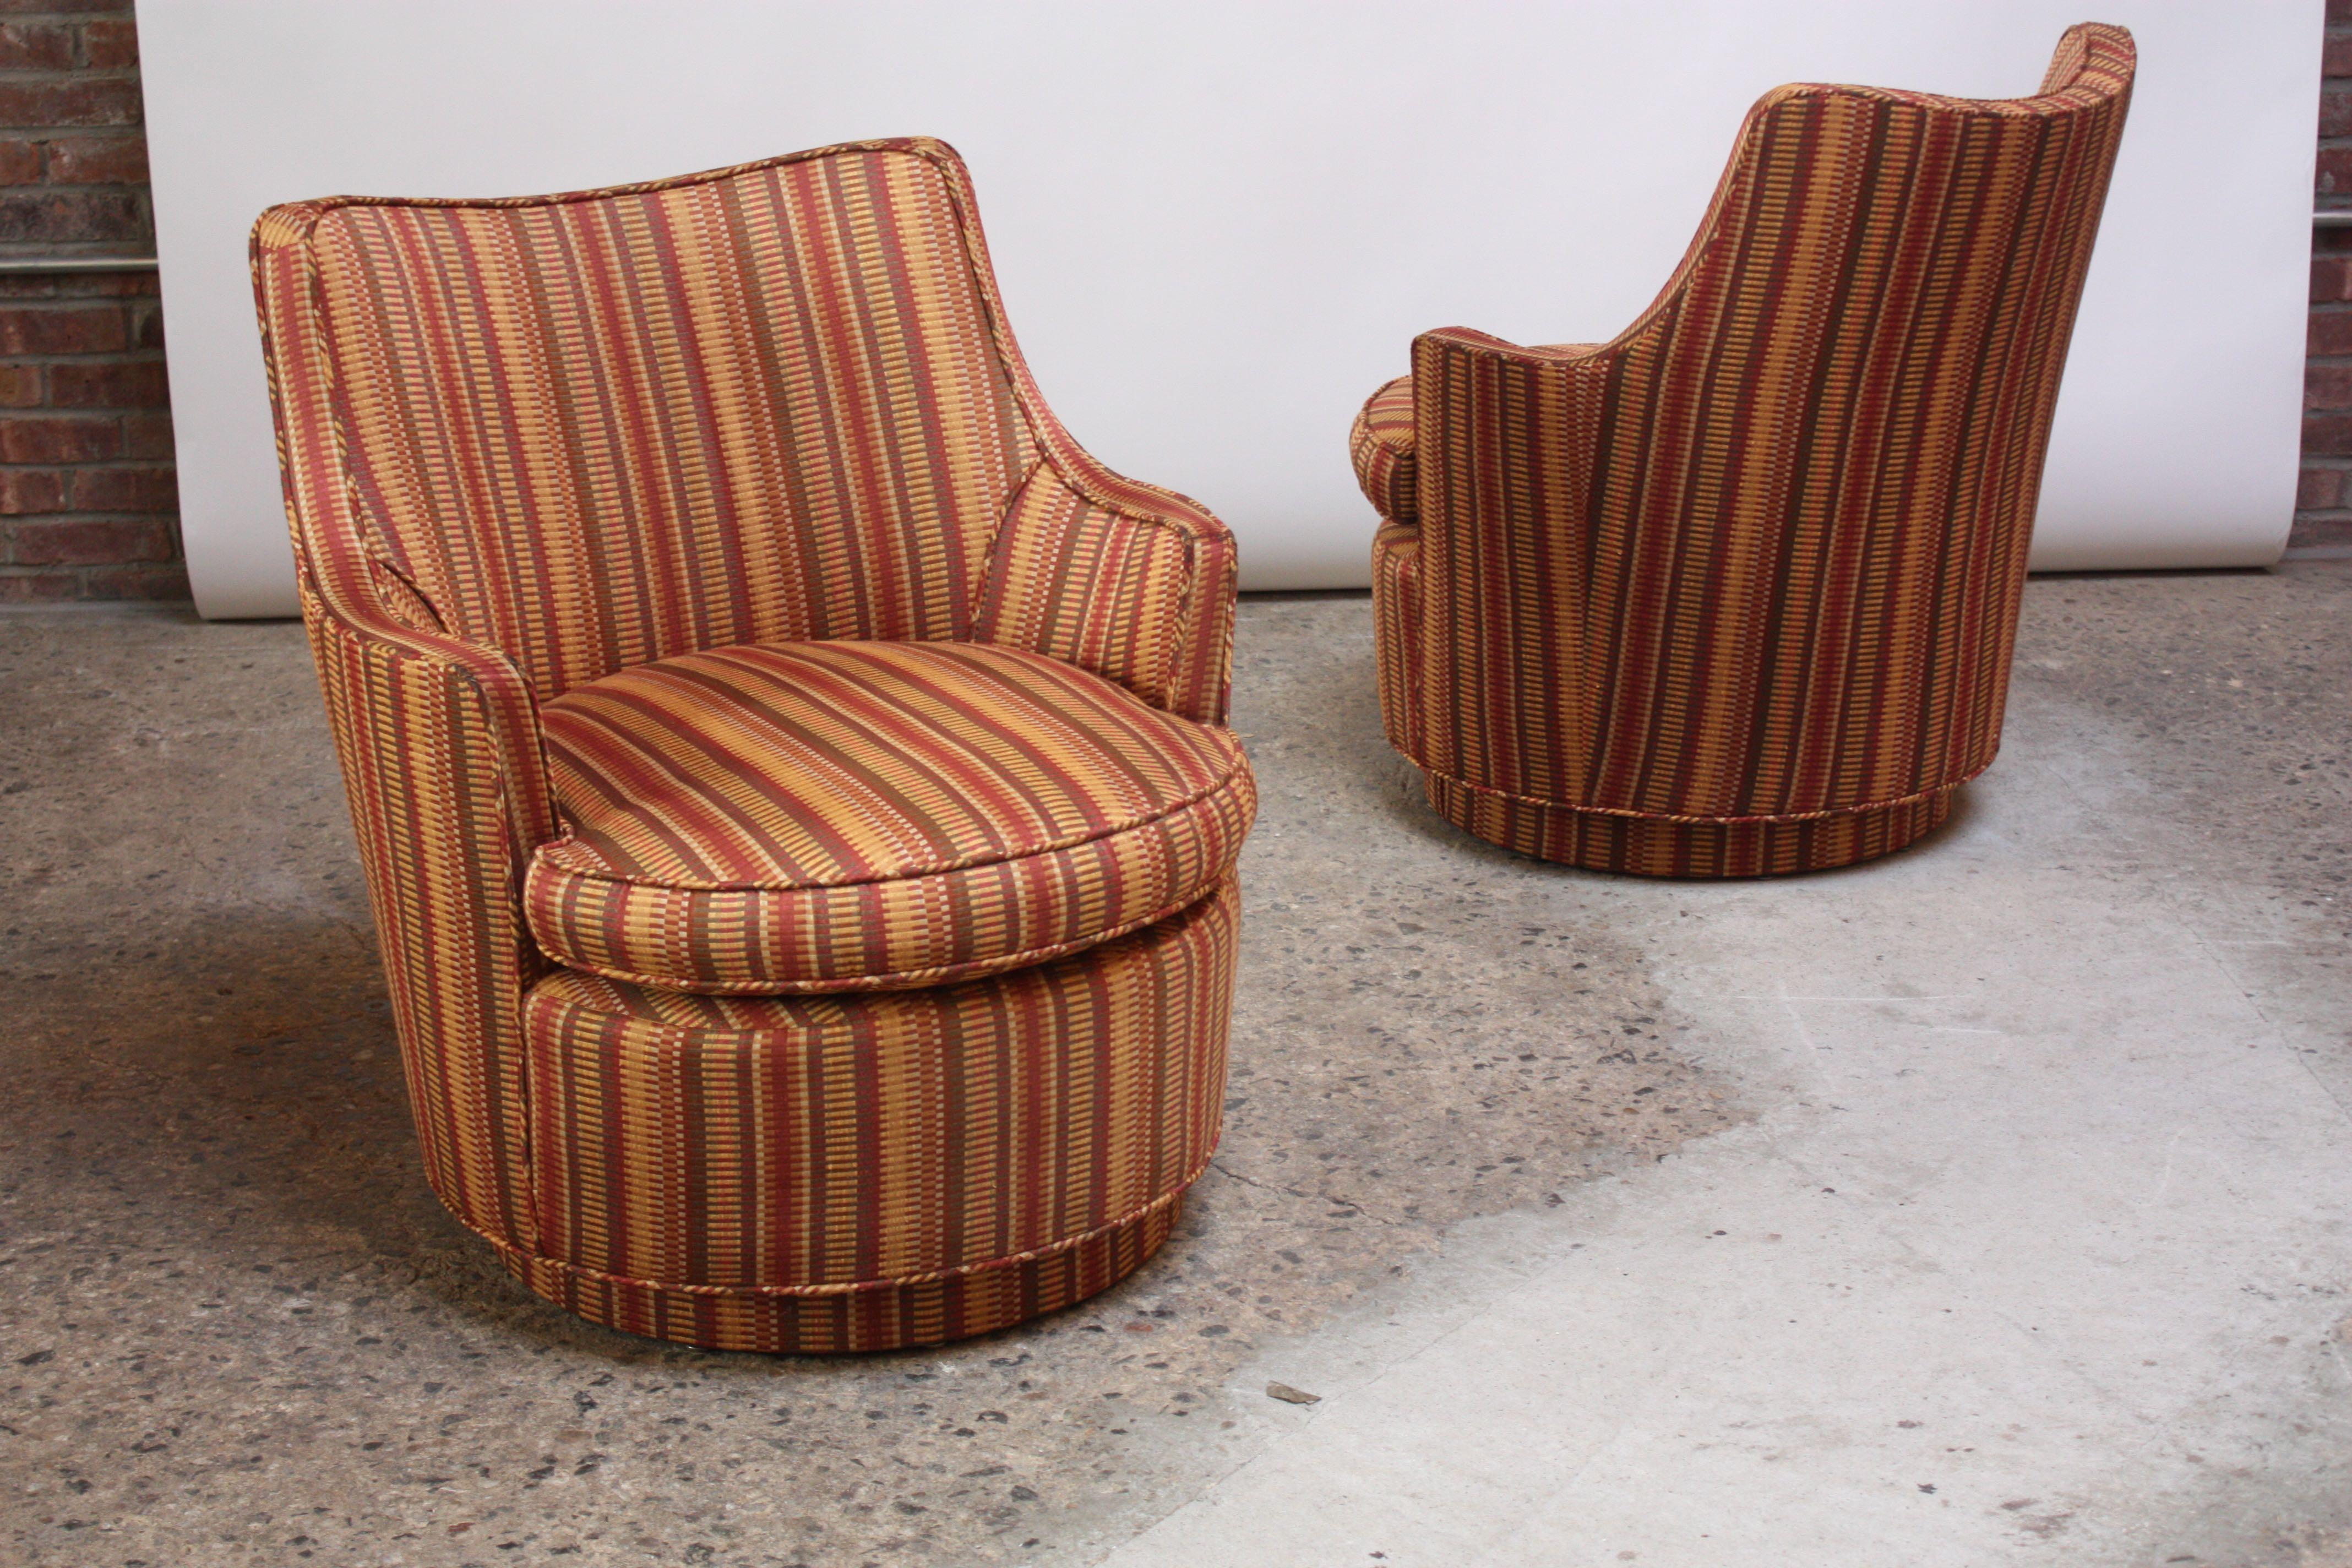 Small scale Mid-Century Modern armchairs with swivel function reminiscent of Edward Wormley's design for Dunbar but unmarked. The chairs and swivel bases were reupholstered (likely in the 1970s or 1980s), and there is slight wear commensurate with